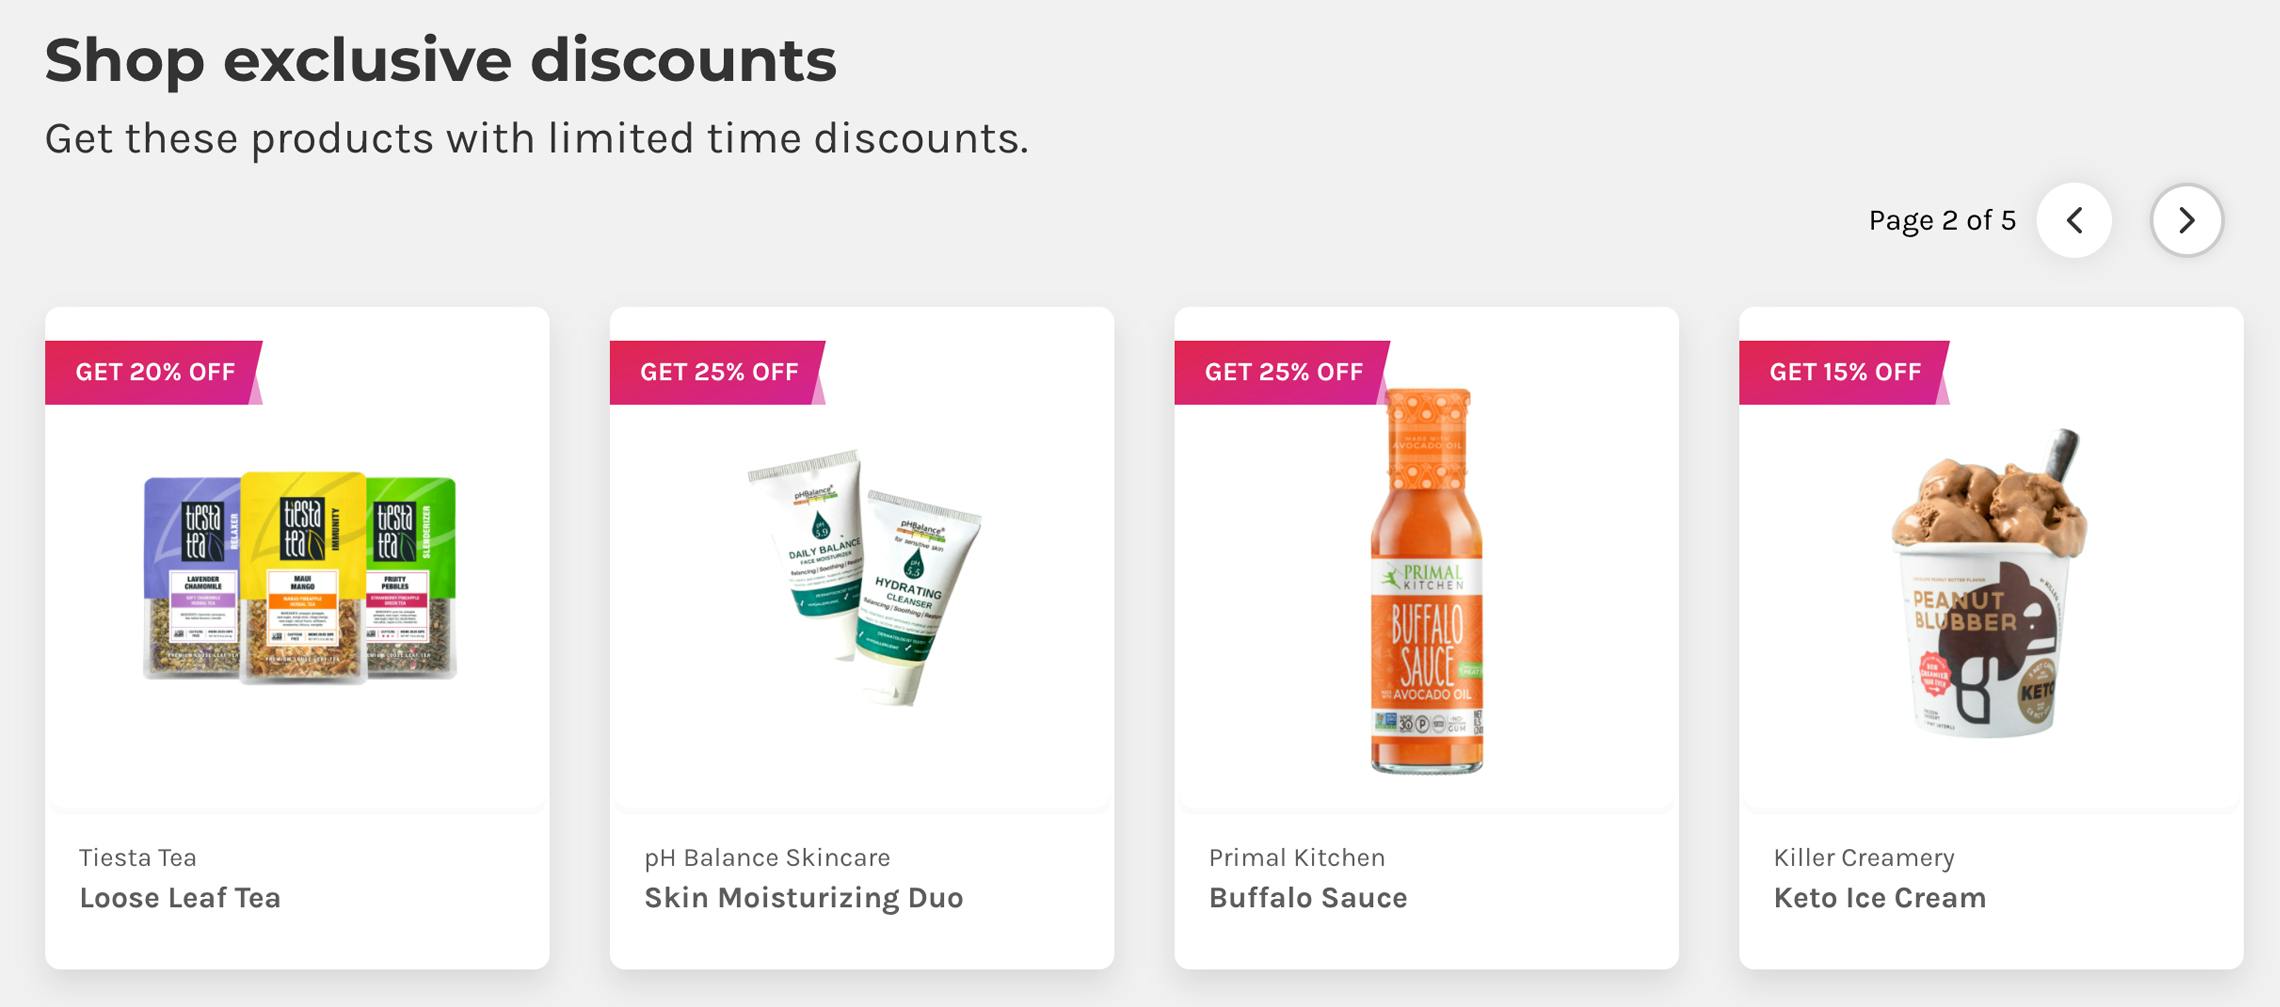 a screenshot of products that have exclusive coupons through socialnature.com